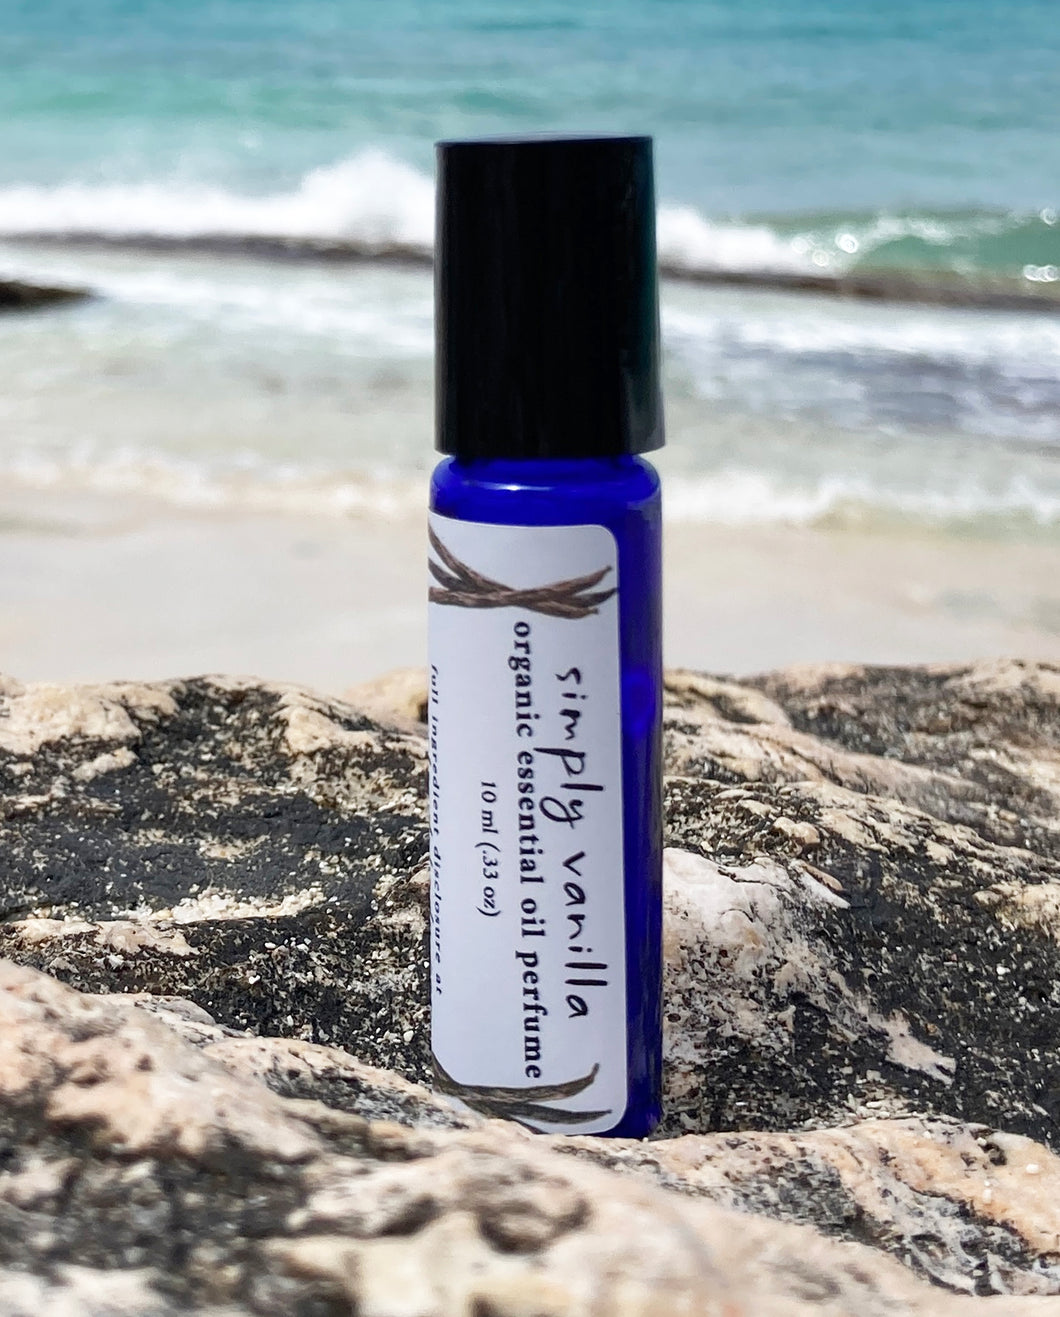 A 10 ml blue glass roller bottle, filled with essential oil perfume, rests on a rock at the beach with the ocean waves in the background